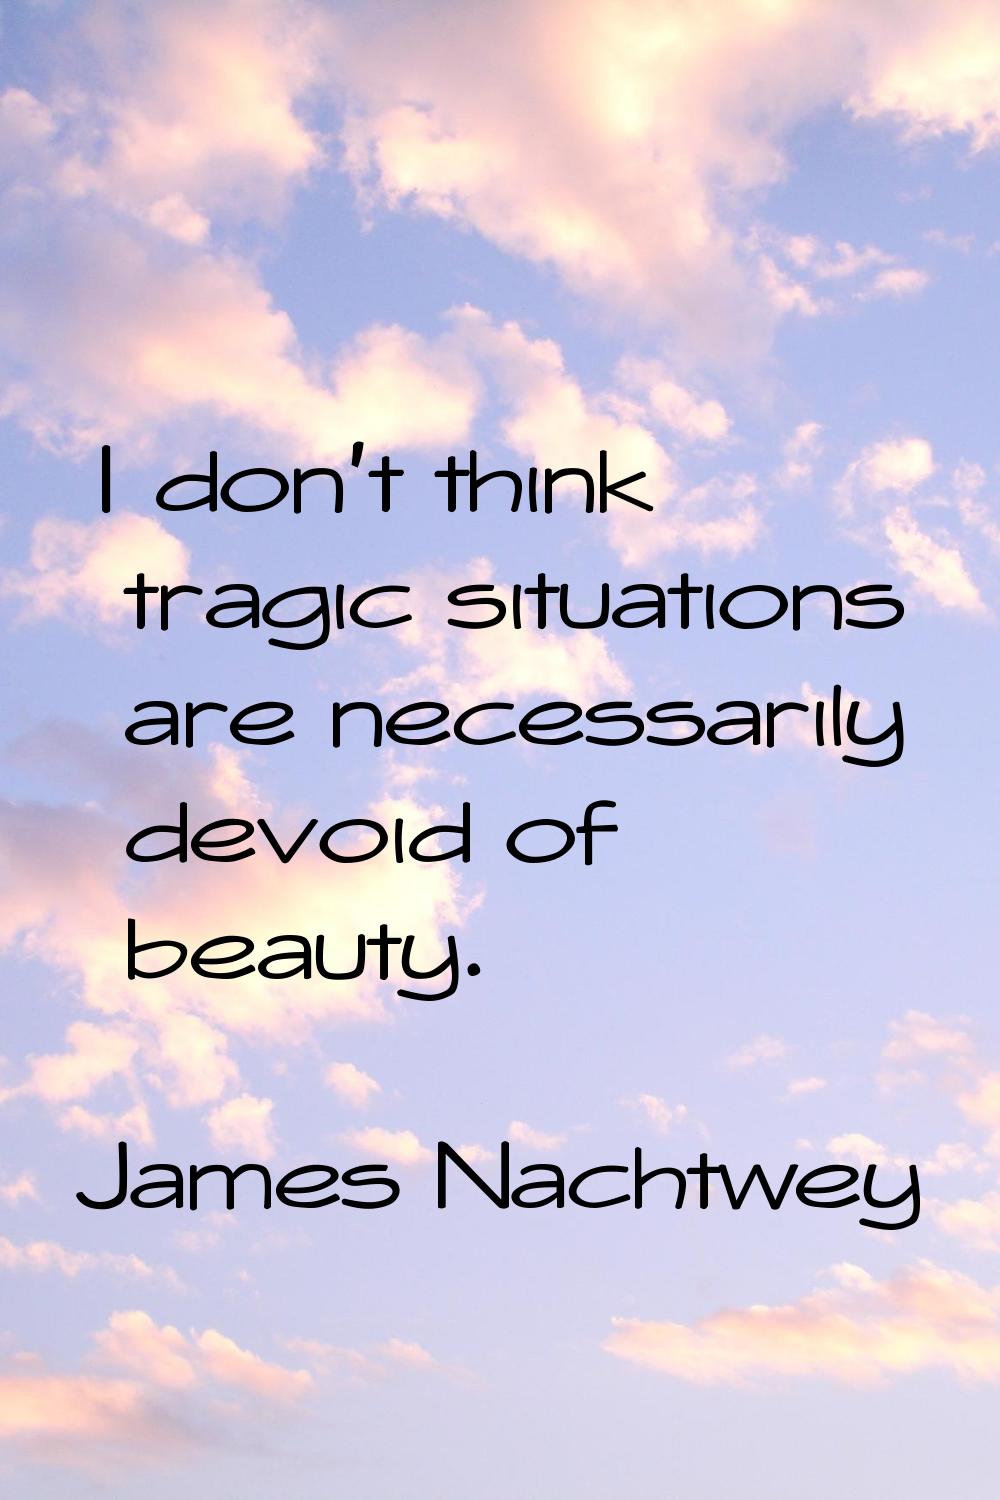 I don't think tragic situations are necessarily devoid of beauty.